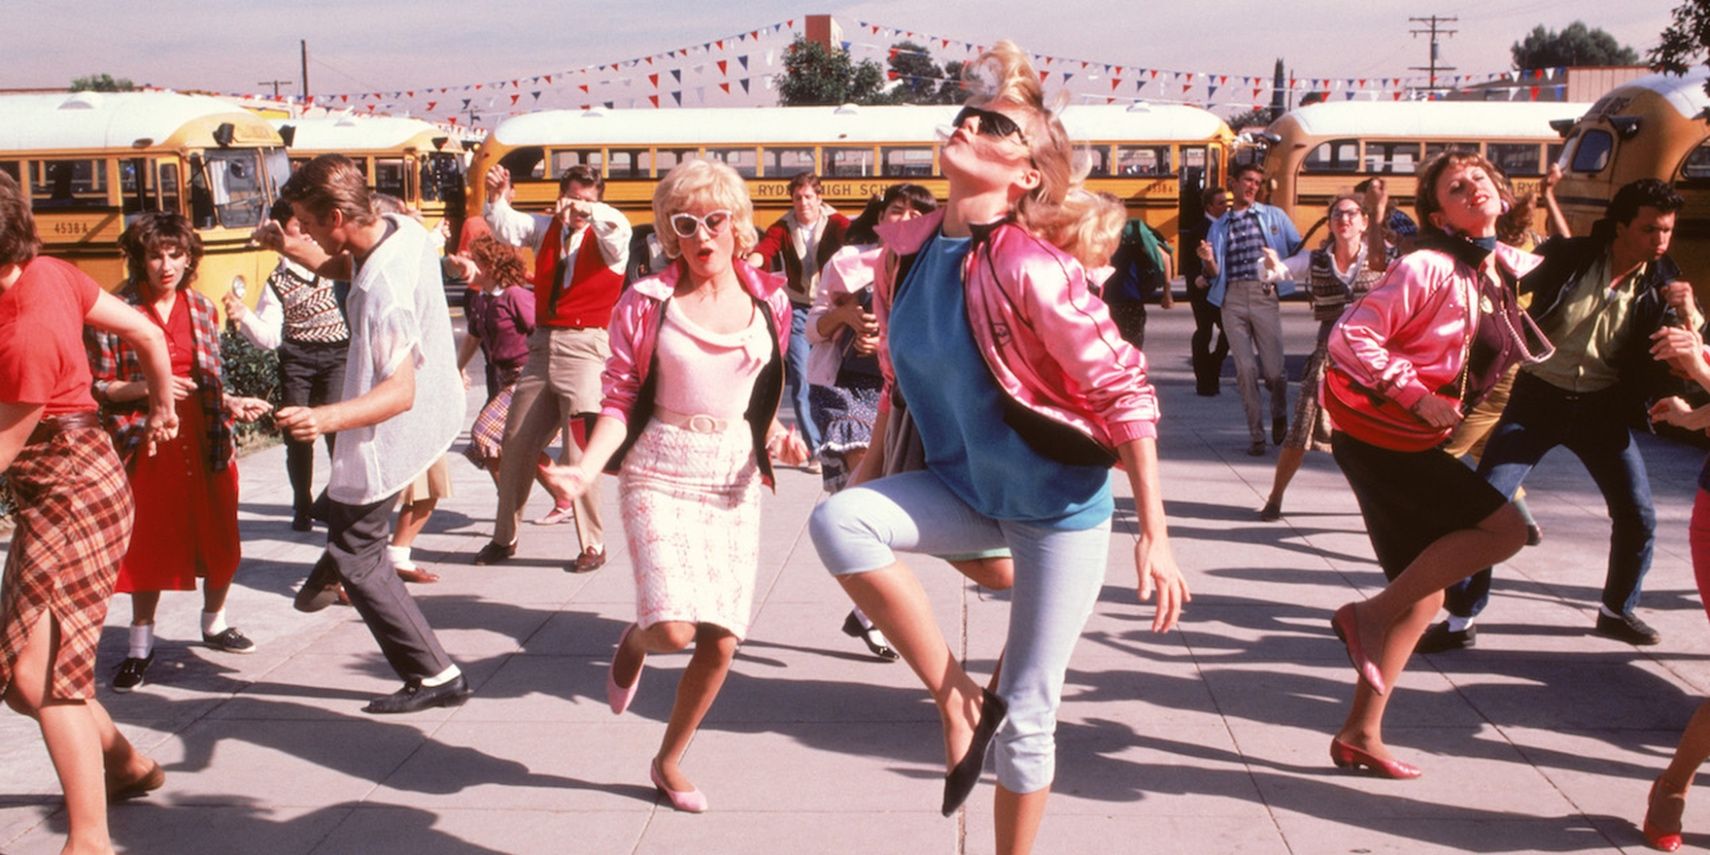 Steph and students dancing gin front of school in Grease 2